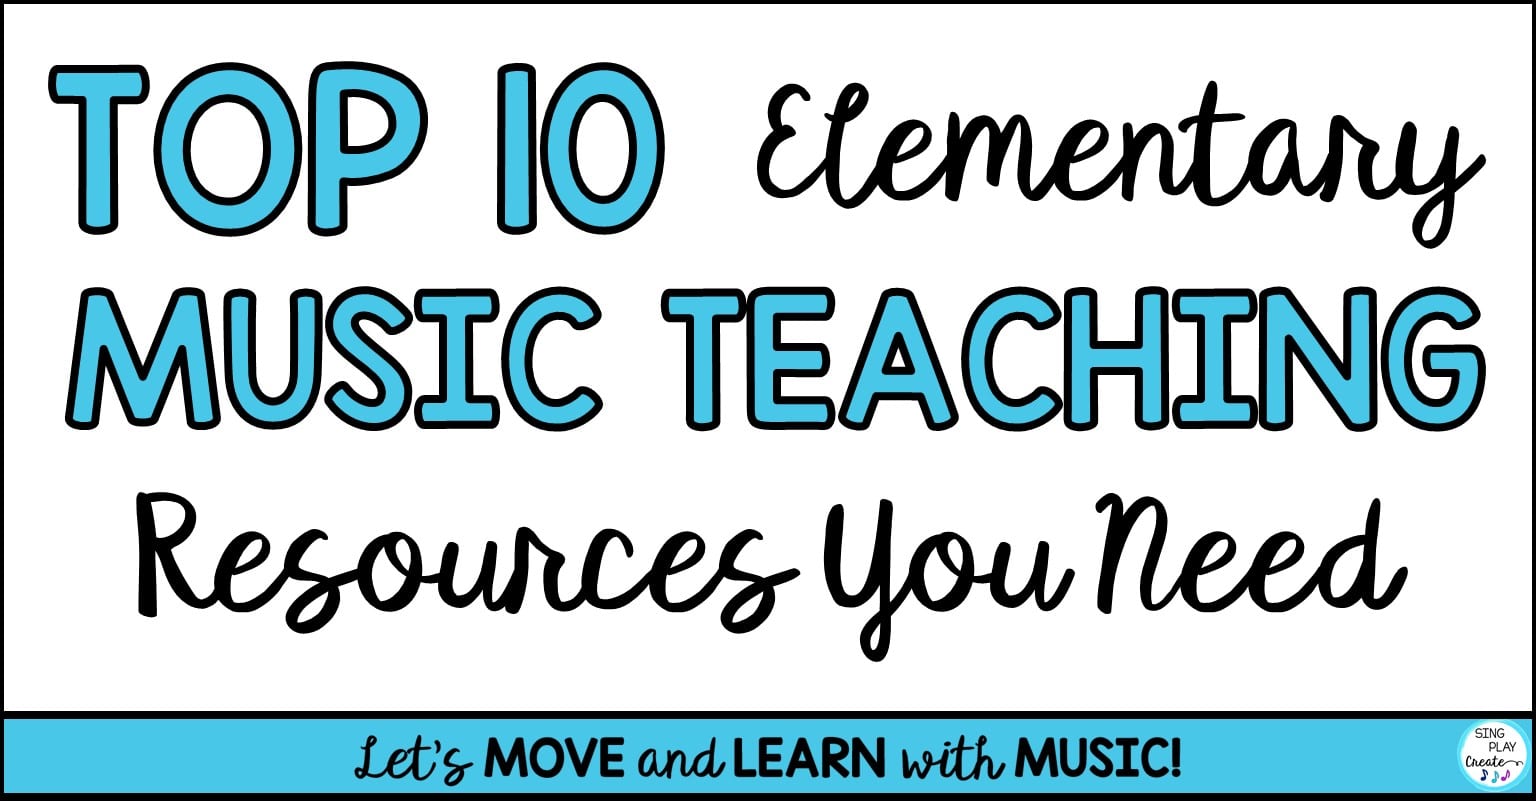 You are currently viewing The Top 10 Elementary Music Teaching Resources You Need